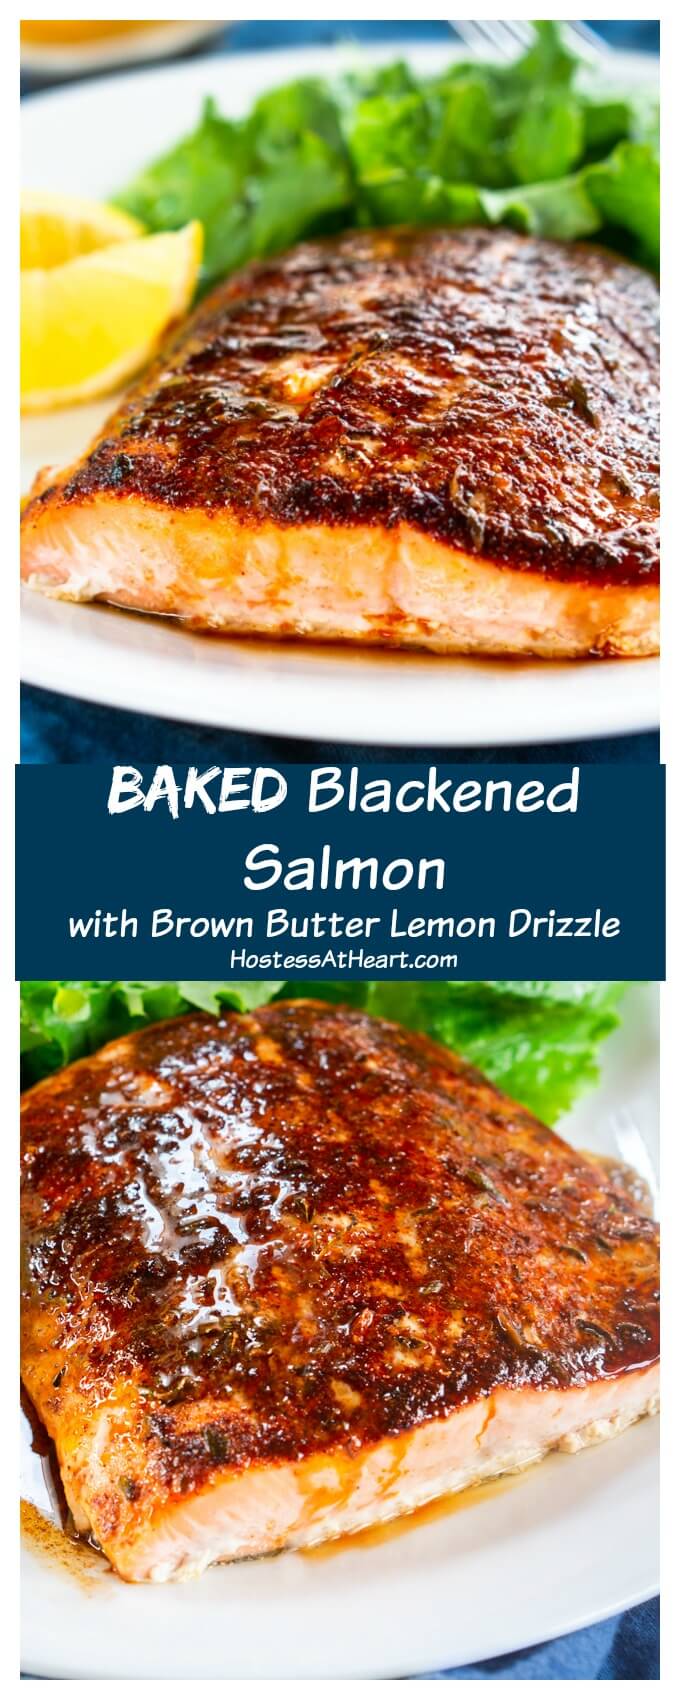 Baked Blackened Salmon Recipe with Brown Butter Lemon Drizzle - Hostess ...